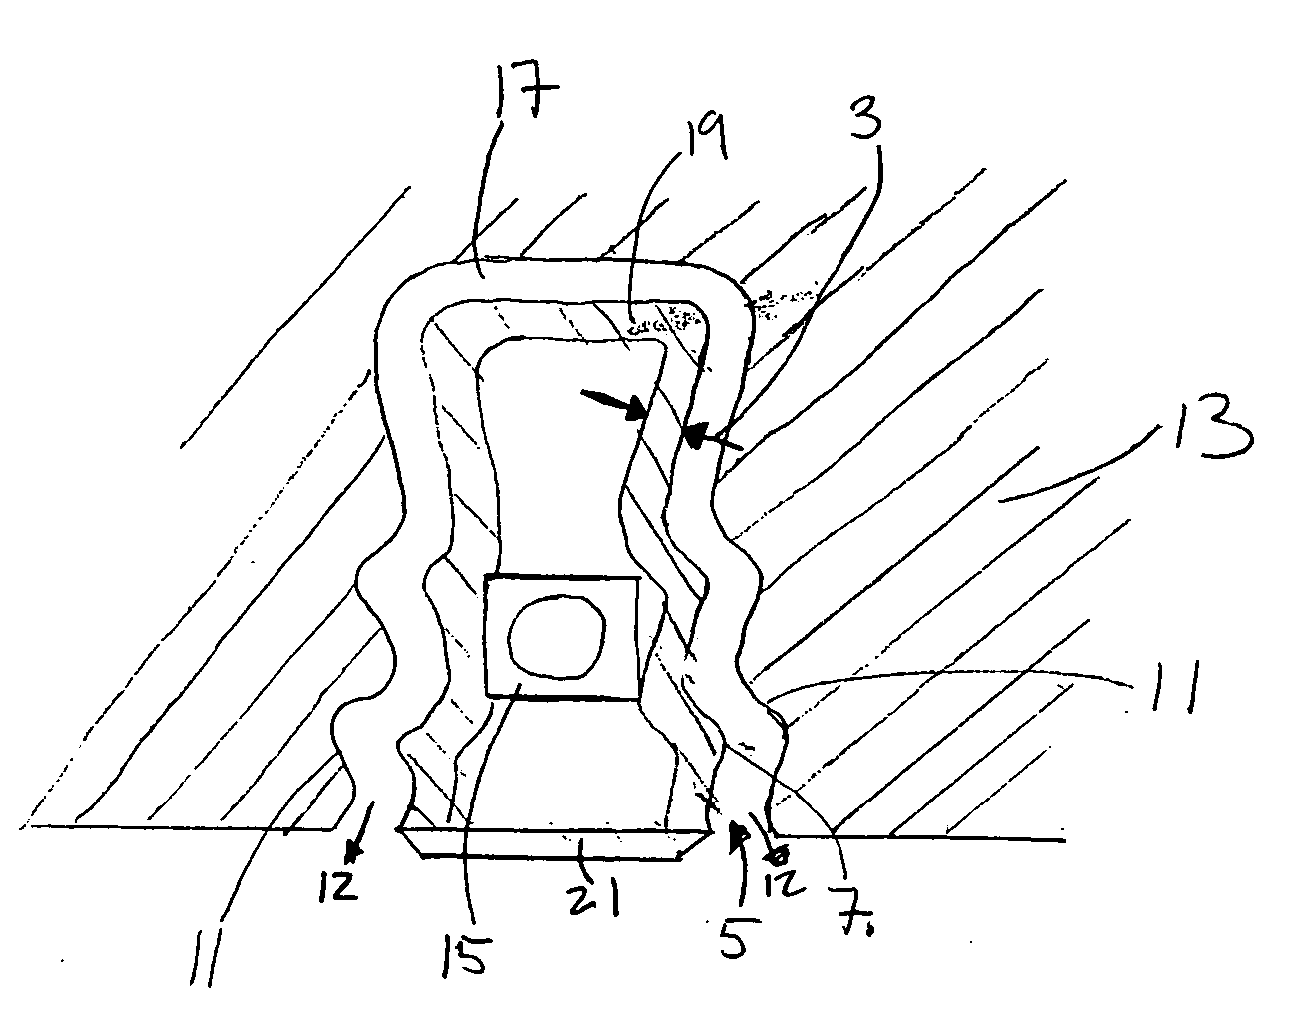 Apparatus and method for white layer and recast removal